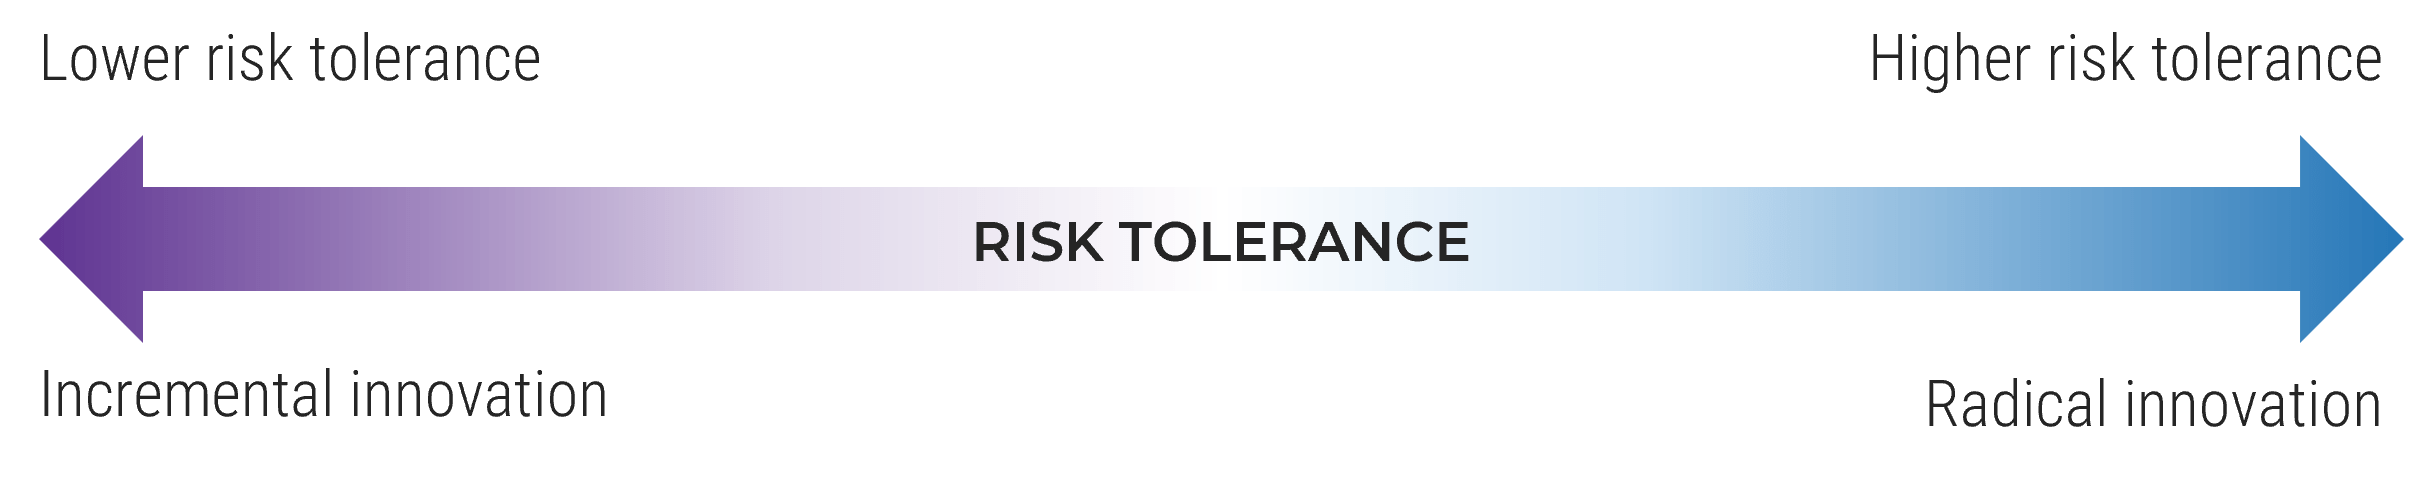 An arrow showing the directions of risk tolerance.